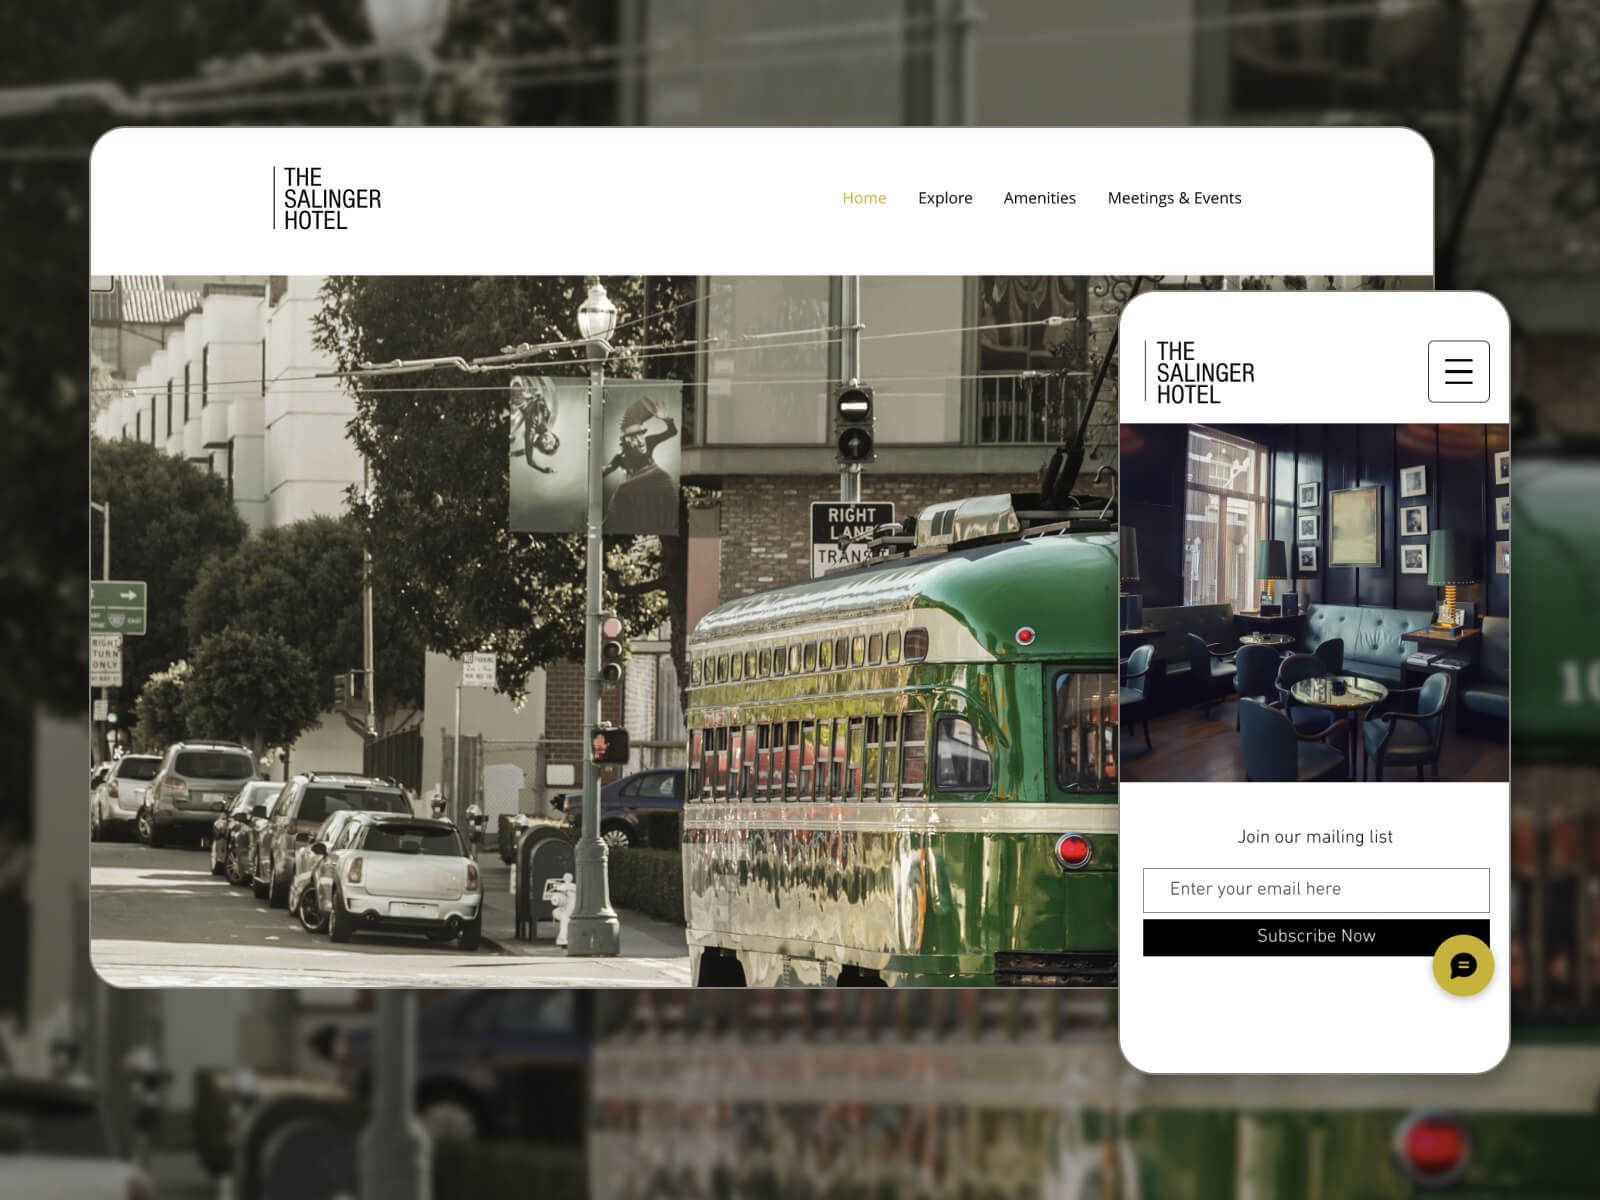 Picture of THE SALINGER HOTEL - attractive and user-friendly hotel booking WP theme in darkolivegreen, white, silver, gray, and darkslategray color array.